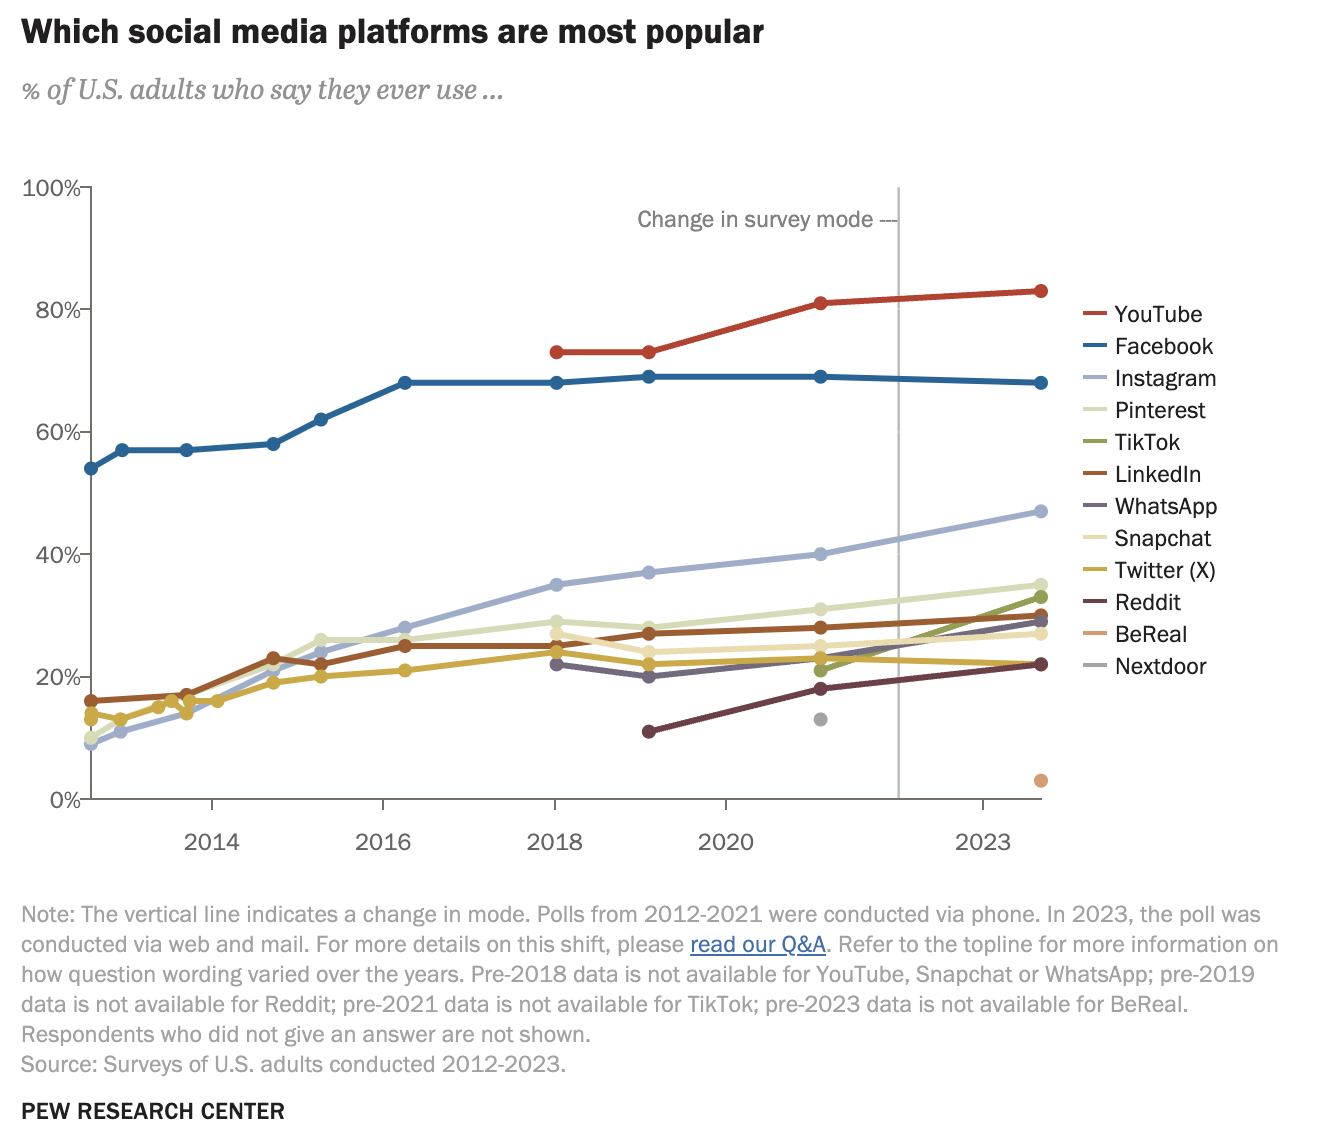 chart shows the popularity of social media channels